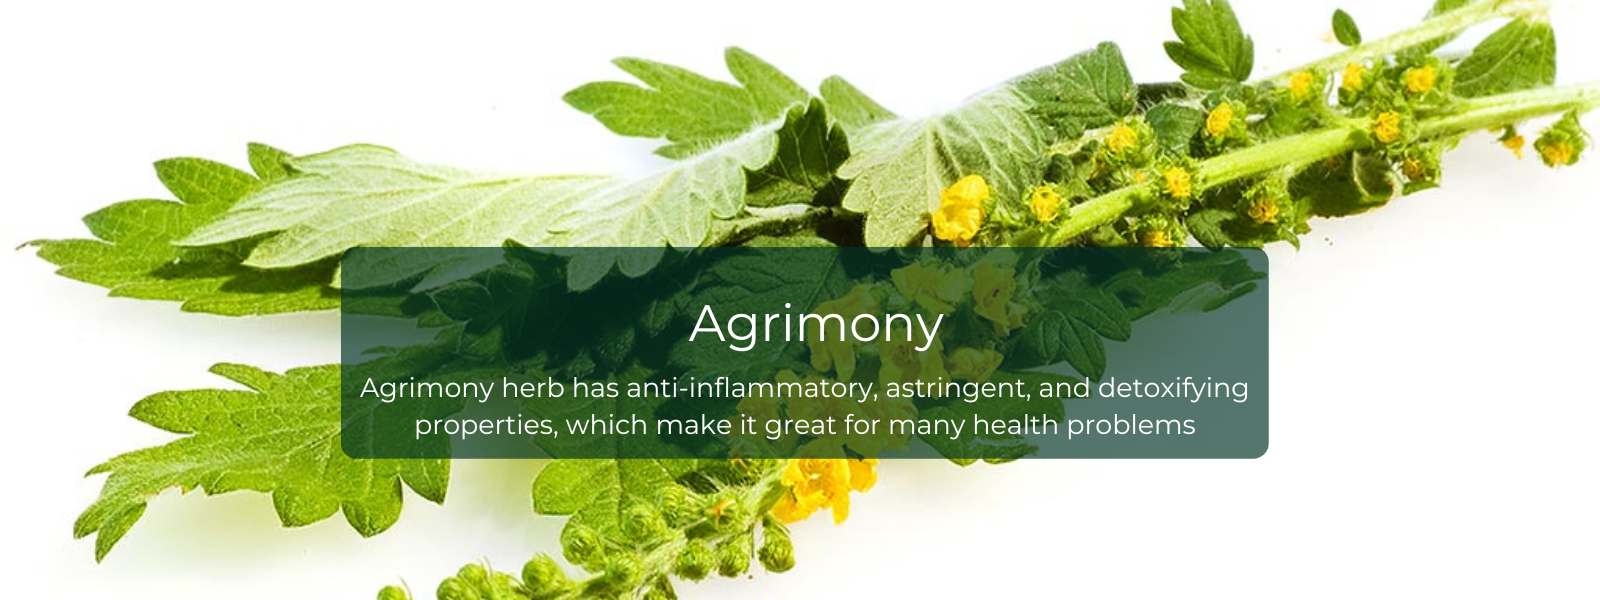 Agrimony - Health Benefits, Uses and Important Facts